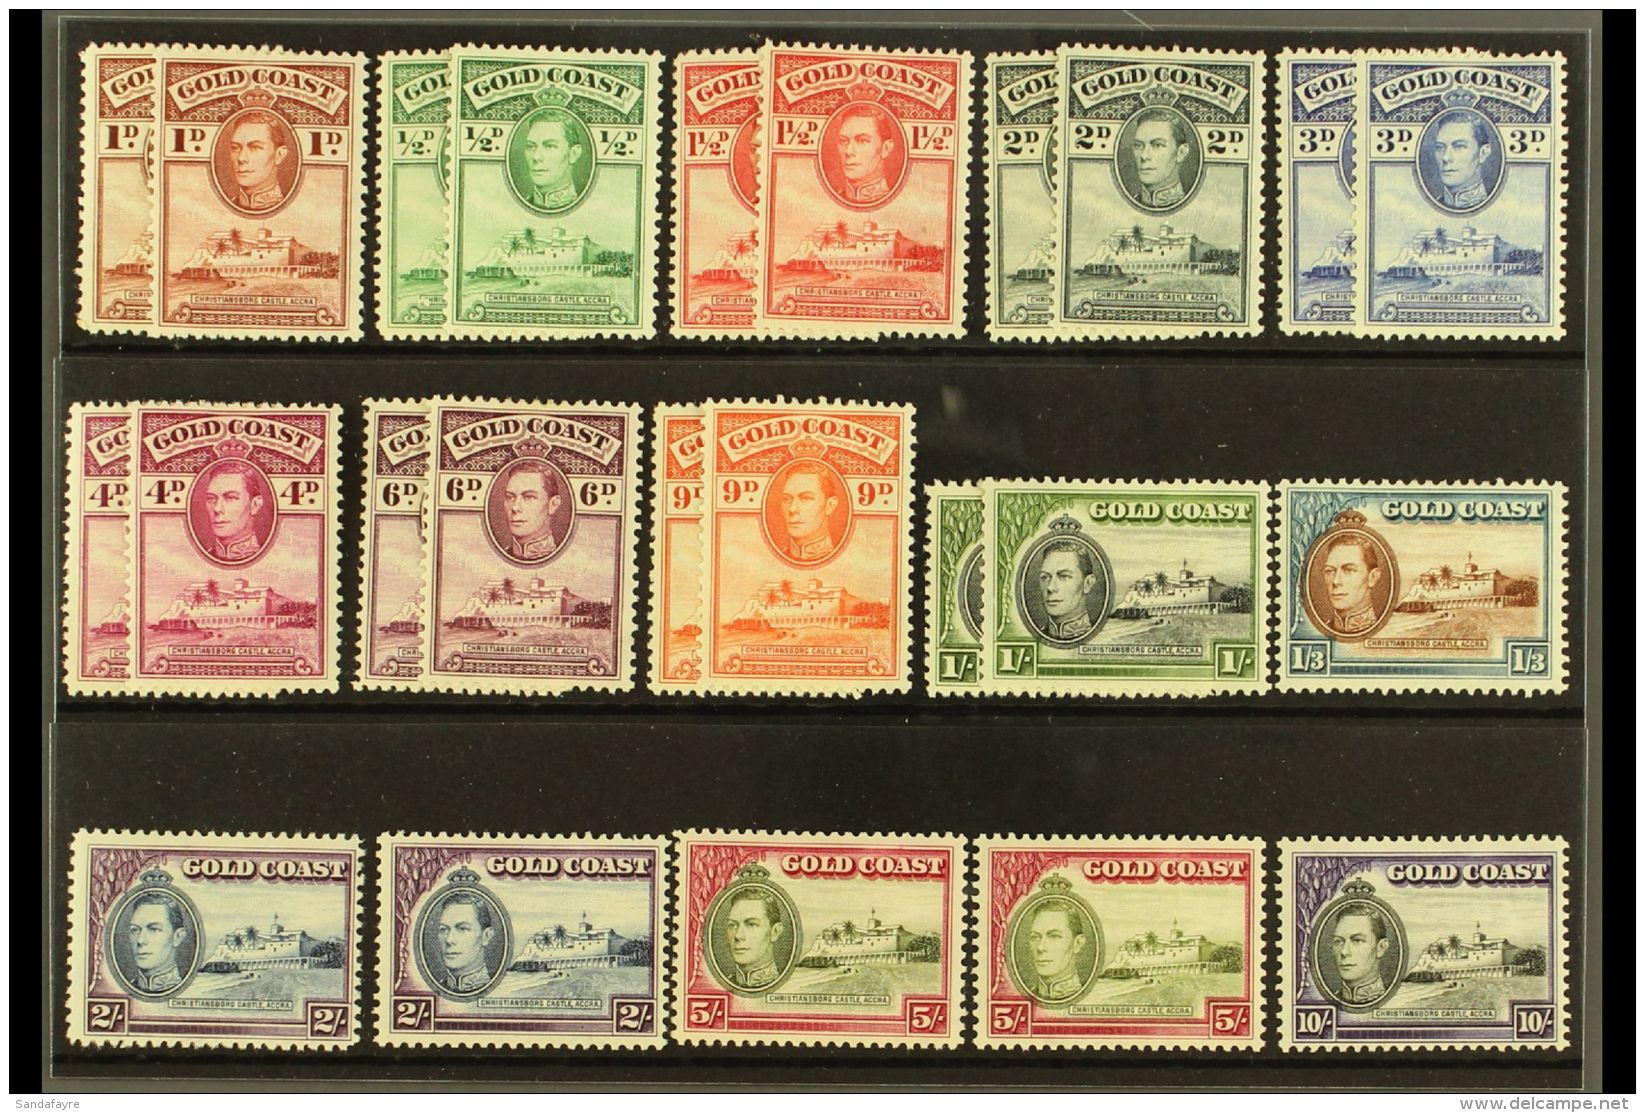 1938-43 Pictorials Complete Set With ALL PERFORATION TYPES, SG 120/32 &amp; 120a/31a, Superb Mint, Very Fresh. (24... - Goudkust (...-1957)